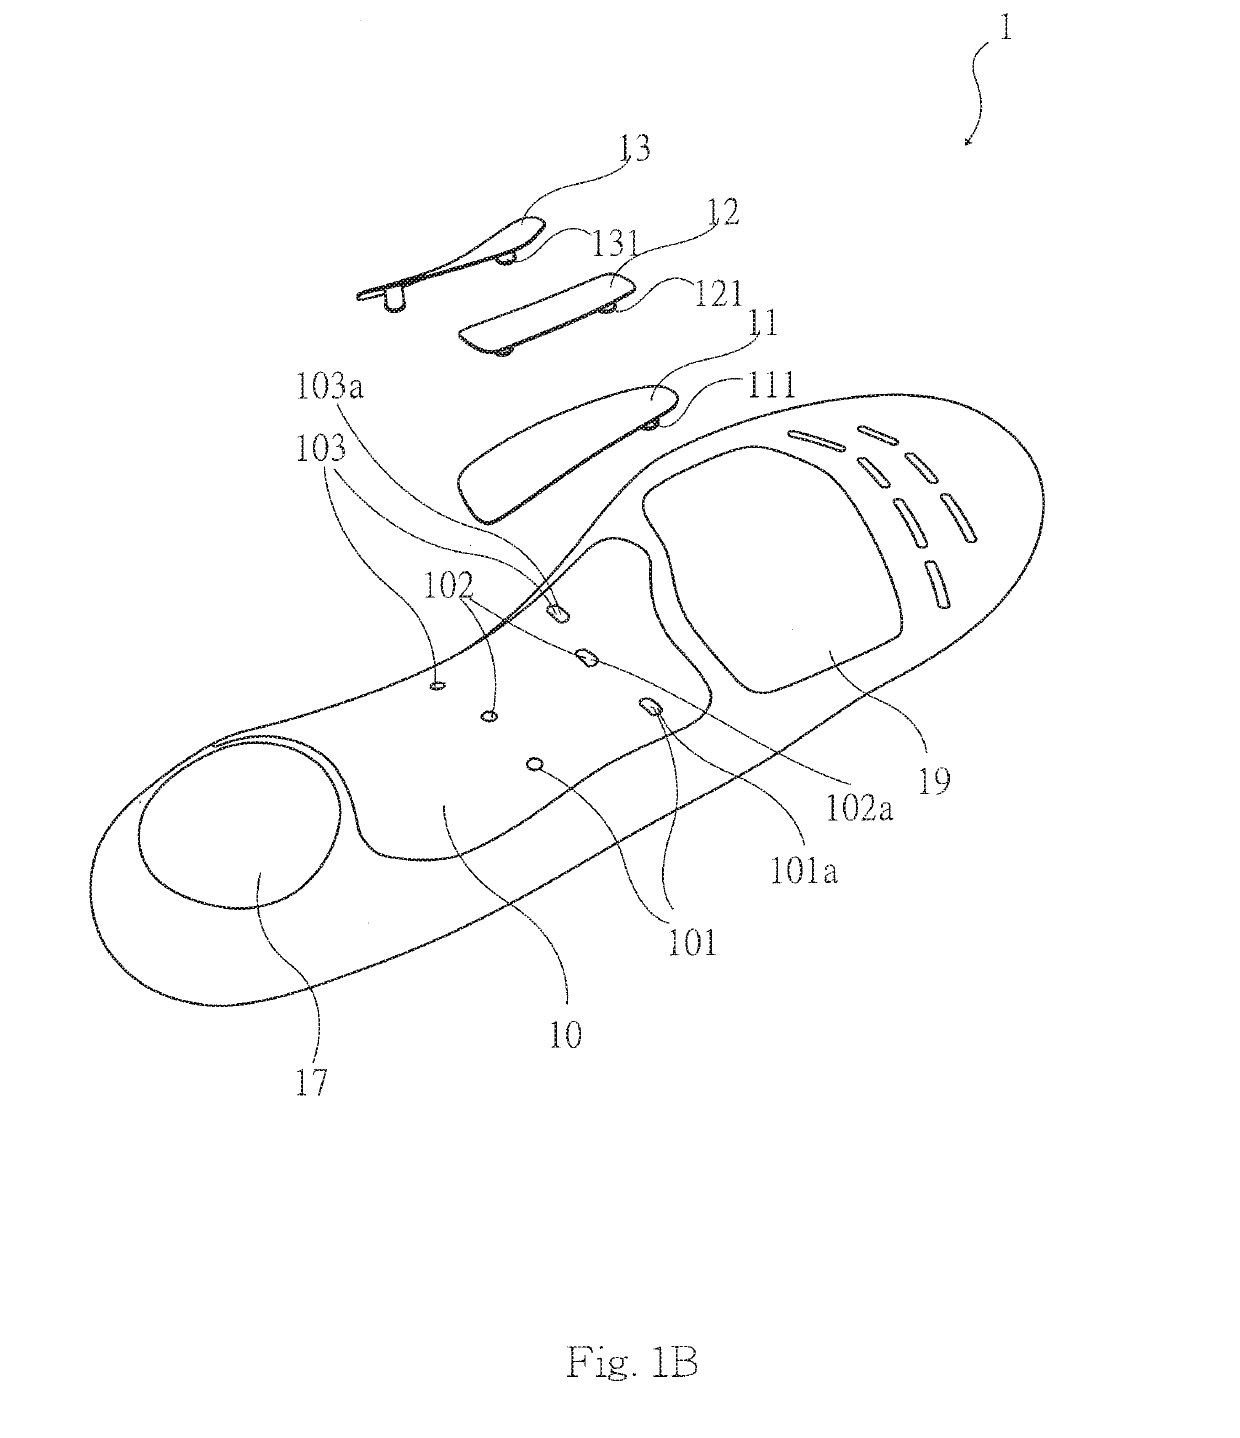 Tunable rigidity insole with interchangeable stiffeners